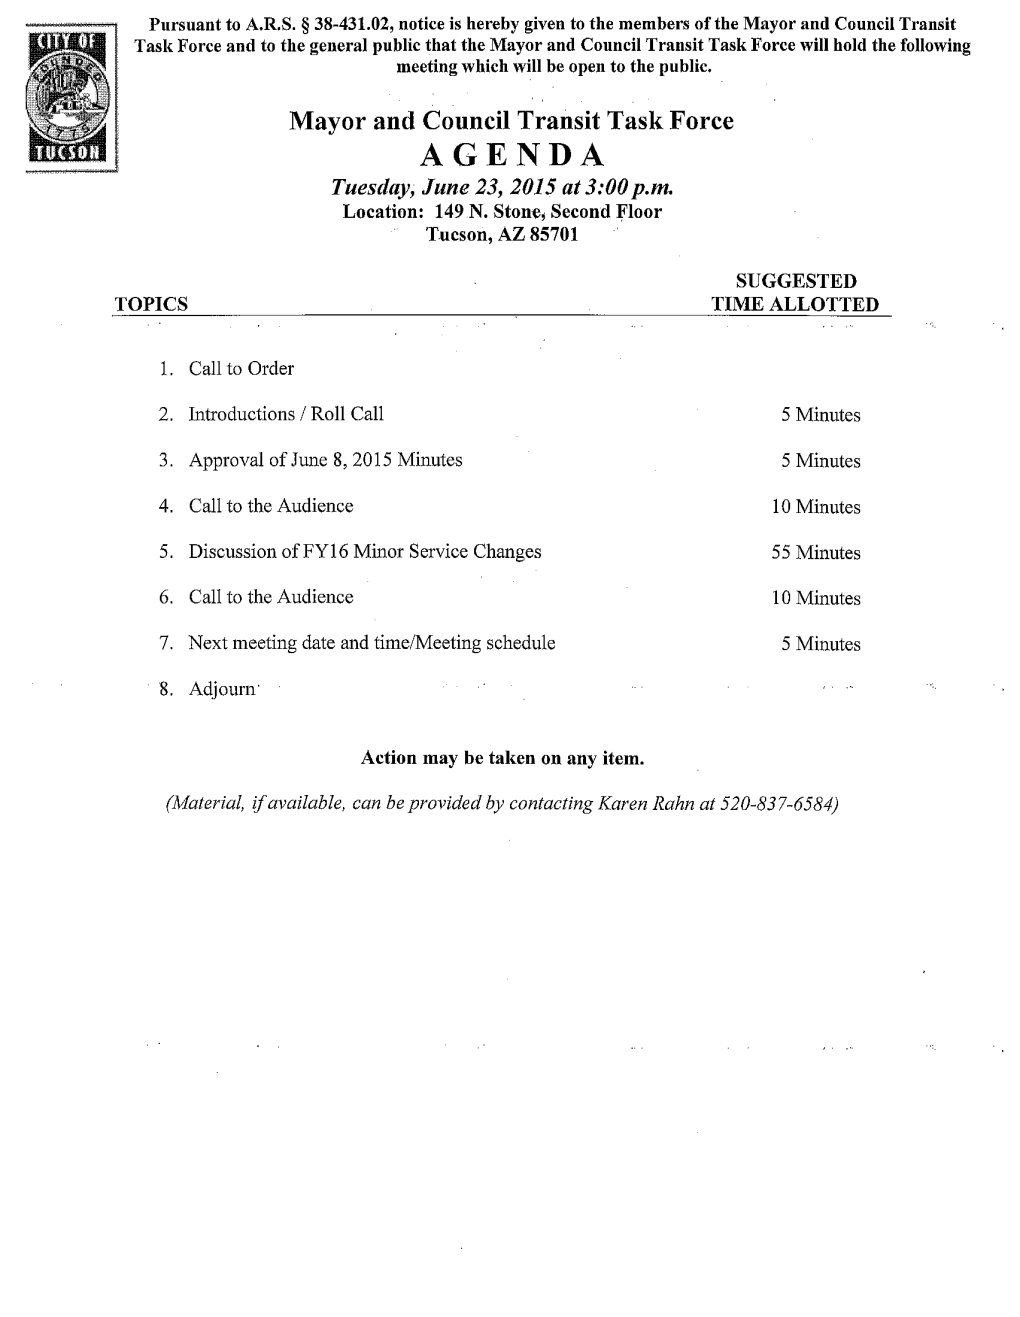 Mayor and Council Transit Task Force MINUTES Monday, June 8, 2015, 4:00 P.M